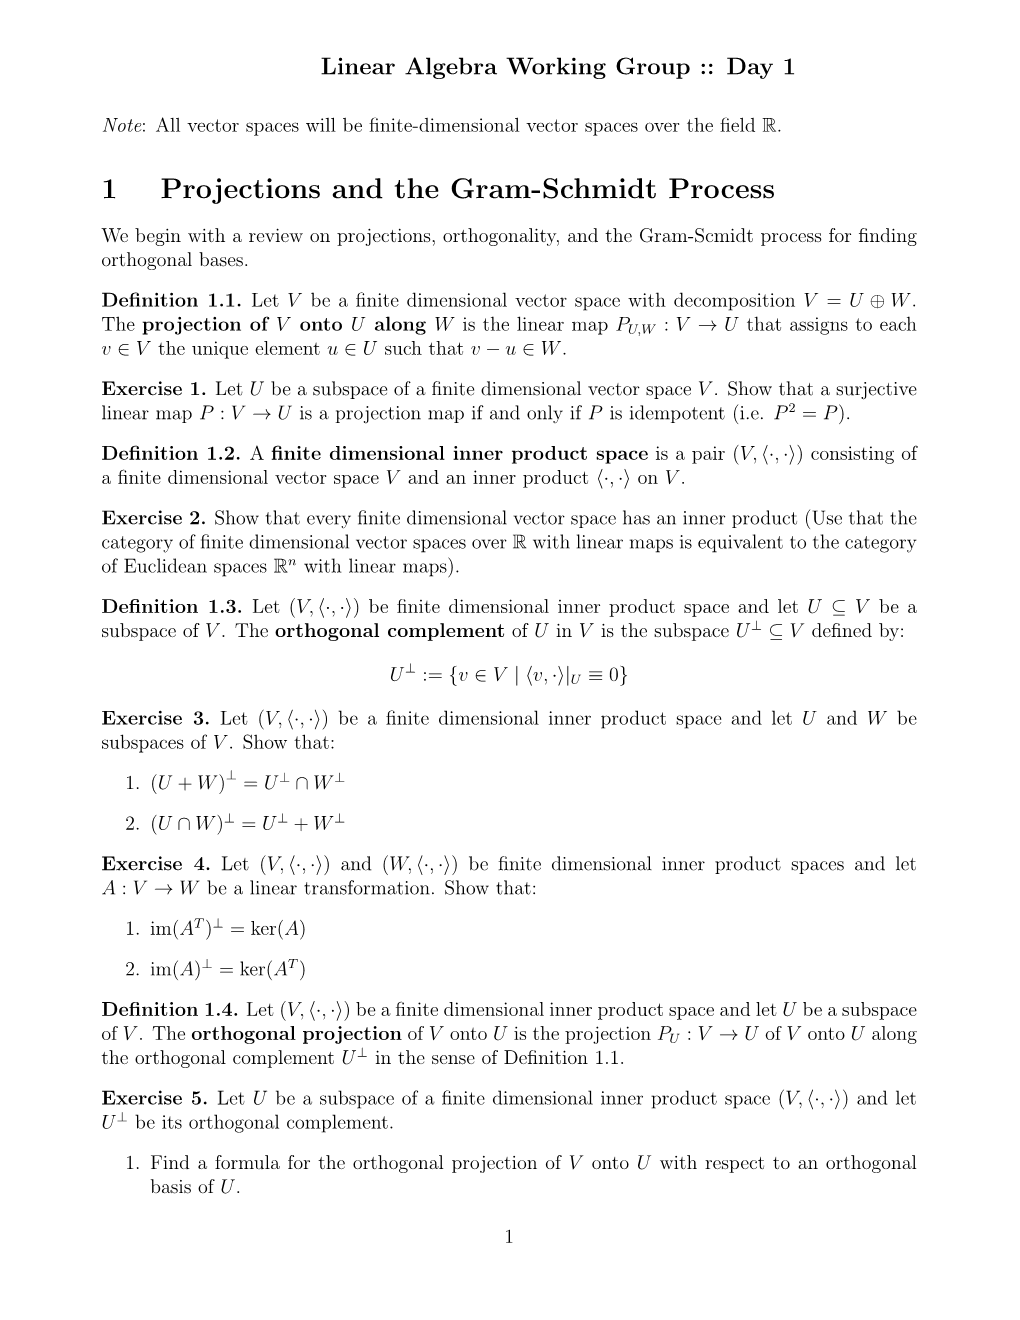 1 Projections and the Gram-Schmidt Process